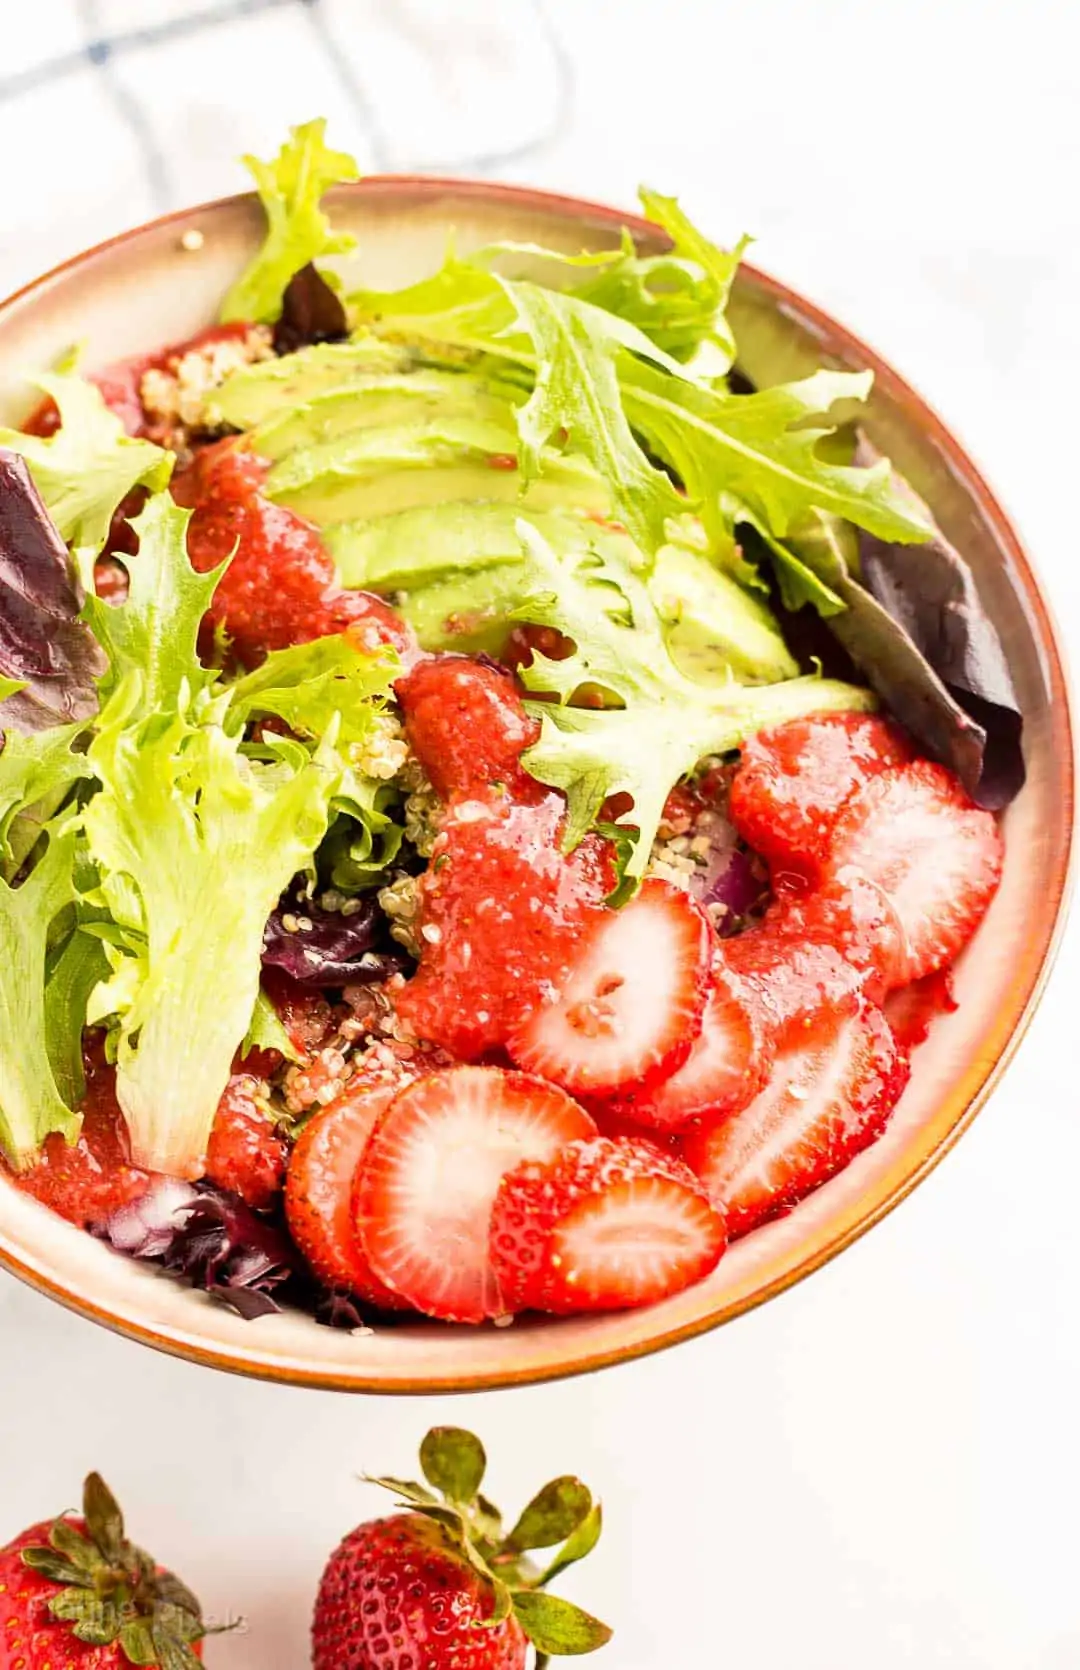 Prepared Summer Strawberry Salad in a bowl